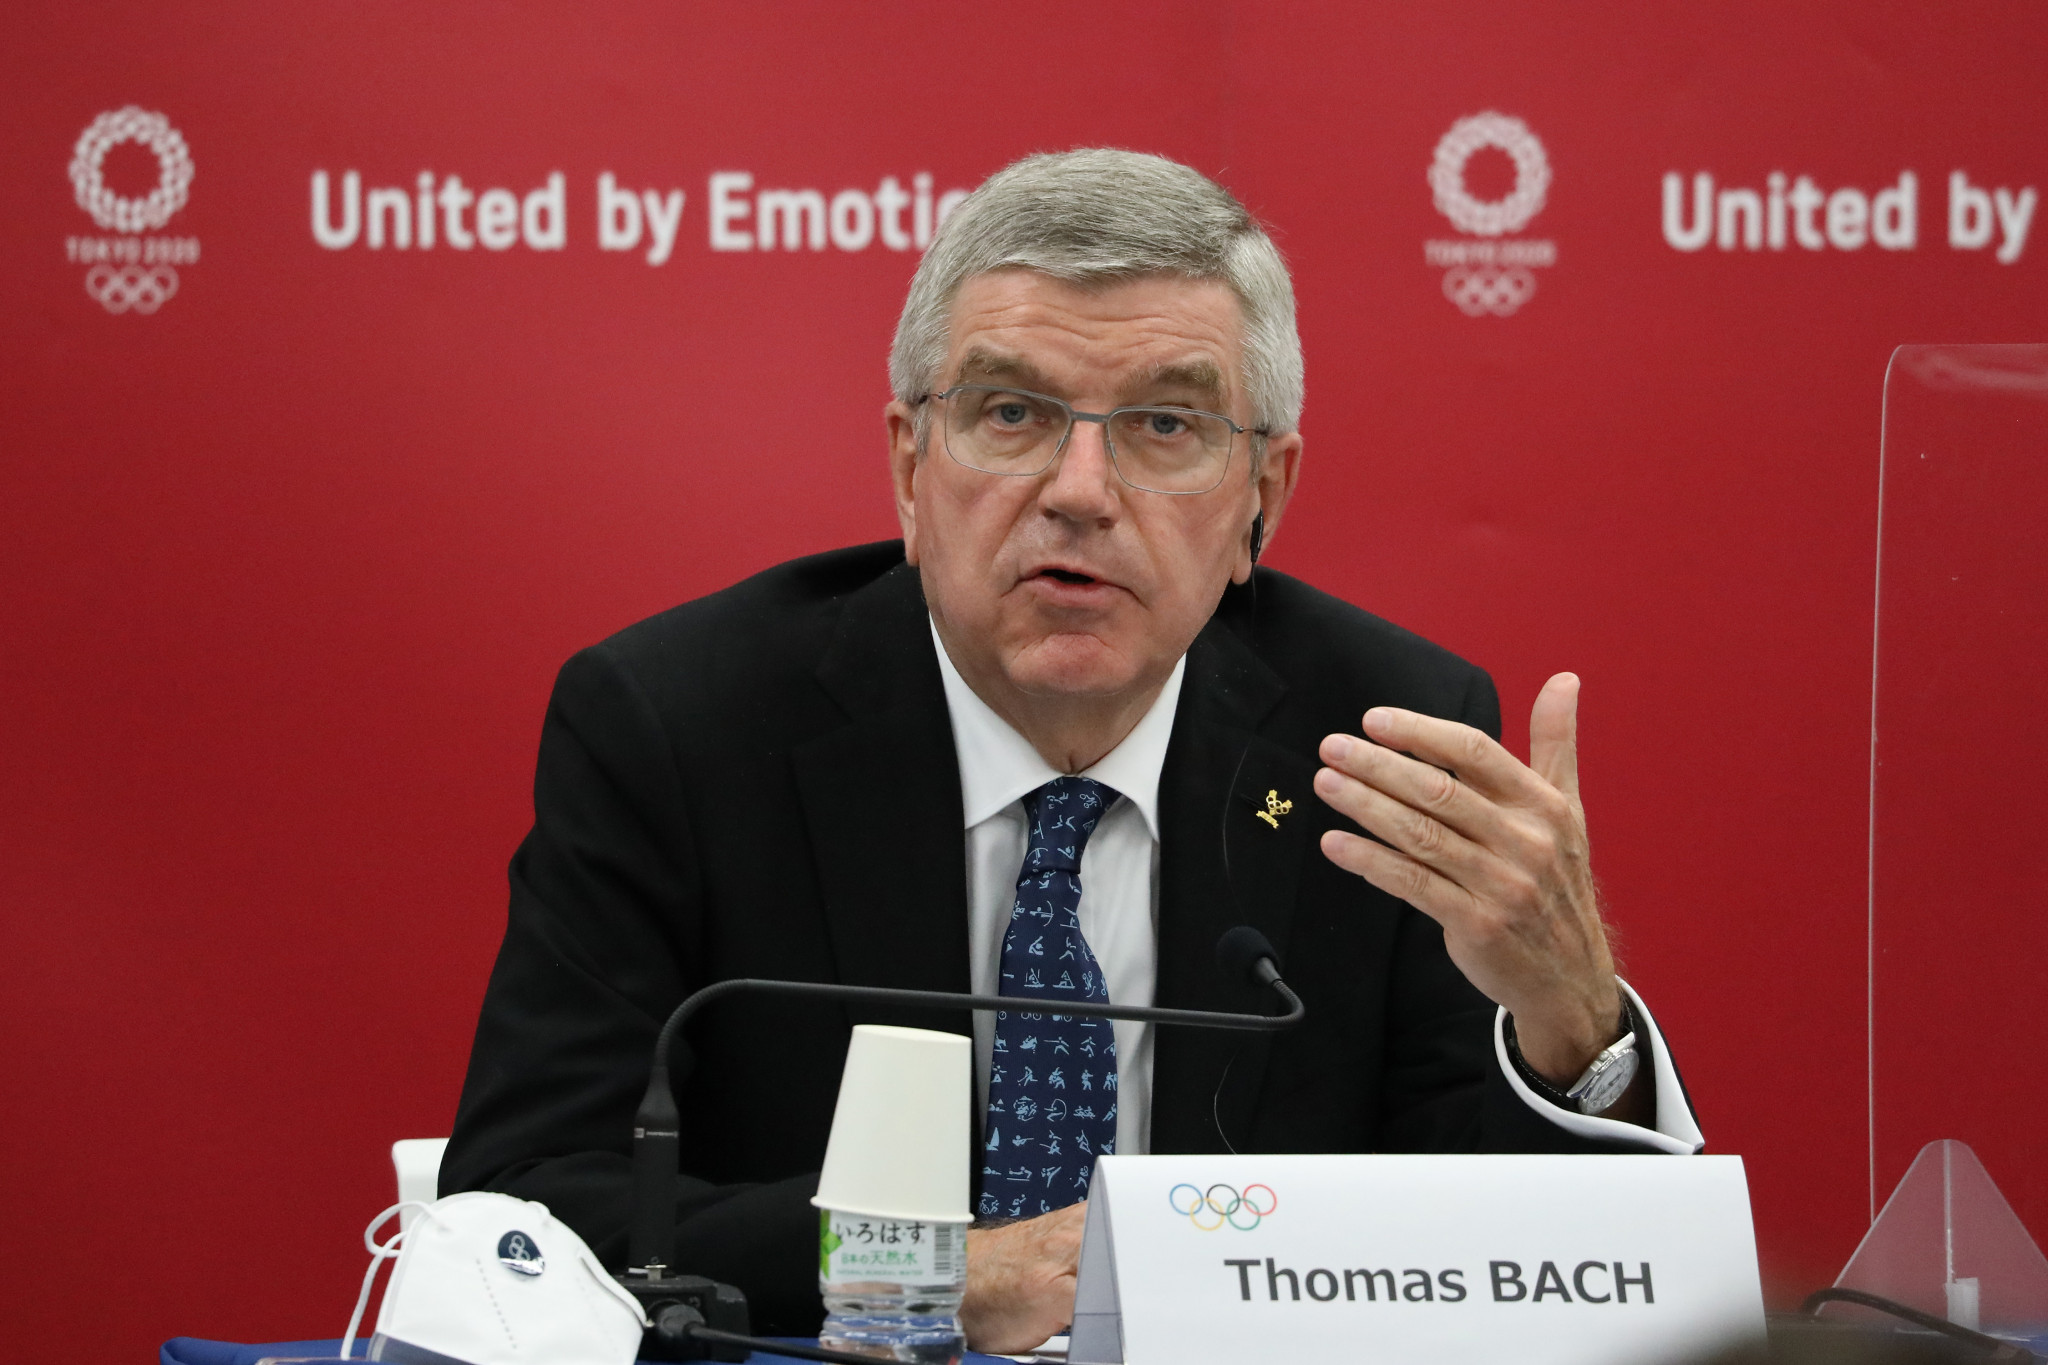 International Olympic Committee (IOC) President Thomas Bach is set to visit Hiroshima on July 16 as part of efforts to promote peace ahead of the contentious staging of the Olympic and Paralympic Games in Tokyo.  Citing "sources close to the matter", Kyodo News reports that Bach is planning to go to the site which was devastated by an atomic bomb in the final year of the Second World War.  It also reported that there are plans for IOC vice-president John Coates to make a trip to Nagasaki - another city hit by the nuclear weapon - on the same day Bach arrives in Hiroshima.  The visits to the two cities are expected to mark the start of the Olympic Truce - adopted by the United Nations - which is set to be observed from July 16 to September 12.  The resolution aims to ensure a halt to all hostilities, allowing the safe passage and participation of athletes and spectators for the Olympic and Paralympic Games in the Japanese capital.  About 140,000 people died in Hiroshima after an atomic bomb was dropped on the city by the United States Air Forces on August 6 in 1945.  Three days later, Nagasaki was bombed by the Americans resulting in around 40,000 deaths before Japan surrendered, bringing the war to an end on August 15.  Bach had previously planned to visit Hiroshima in May to coincide with the Torch Relay’s passage through the prefecture before the trip was cancelled due to the COVID-19 pandemic.  The German lawyer and Olympic fencing gold medallist is now reportedly due to arrive in Japan on July 9 - three days earlier than planned - before visiting Hiroshima a week later.  Coates has already landed in the host nation ahead of the Olympics which are due to open in less than a month’s time.  The Olympic Torch was carried through the Hiroshima Peace Memorial Park last month ©Getty Images  The Olympic Torch was carried through the Hiroshima Peace Memorial Park last month ©Getty Images  According to Kyodo News, the planned visits to Hiroshima and Nagasaki are part of the Olympic Truce with the IOC looking to promote peace at a time when it faces opposition over the hosting of the Games due to COVID-19 pandemic.  Inspired by the Ancient Games, the IOC revived the Olympic Truce in 1992, and it is now introduced for each edition of the Games.  Earlier this month, Japan's opposition leader Yukio Edano called for Bach and other VIPs, such as world leaders, to be banned from attending the Olympics due to COVID-19 concerns.  Edano, the head of the Constitutional Democratic Party of Japan, argued that only athletes, referees and support staff should be allowed to attend while warning that Tokyo 2020 could cause an "explosion" of new coronavirus infections.  Medical officials have warned the Games could become a "super-spreader" event.  The IOC and Tokyo 2020 organisers will implement a series of strict rules they claim will ensure the Olympics and Paralympics are safe and secure, including a reduction in the number of accredited officials and banning visits to tourist areas.  More than 80 per cent of people inside the Athletes' Village will be vaccinated or be in the process of inoculation in time for the Games, according to the IOC.  The Olympics are scheduled to take place from July 23 to August 8, followed by the Paralympics from August 24 to September 5.  IOC President Thomas Bach is expected to visit Hiroshima on July 16 - the first day of the Olympic Truce observation period ©Getty Images